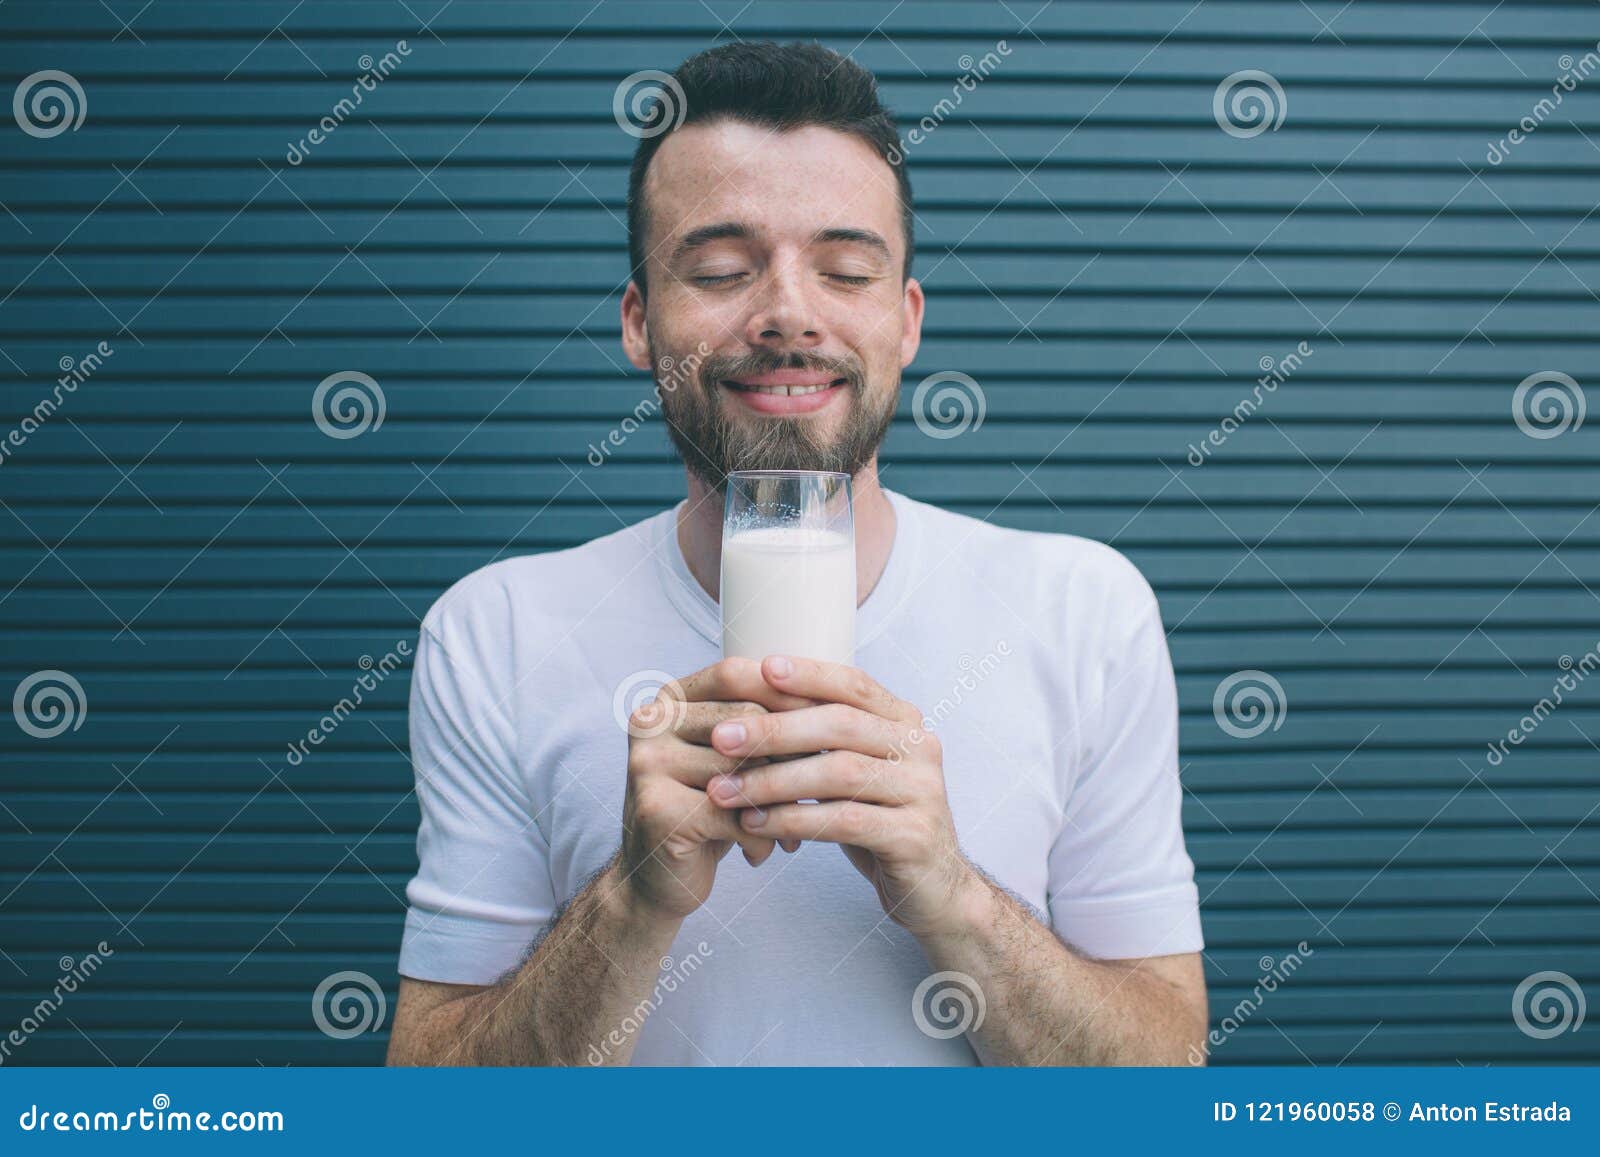 https://thumbs.dreamstime.com/z/portrait-person-holding-glass-milk-close-to-face-enjoying-keeping-eues-closed-isolated-striped-portrait-121960058.jpg